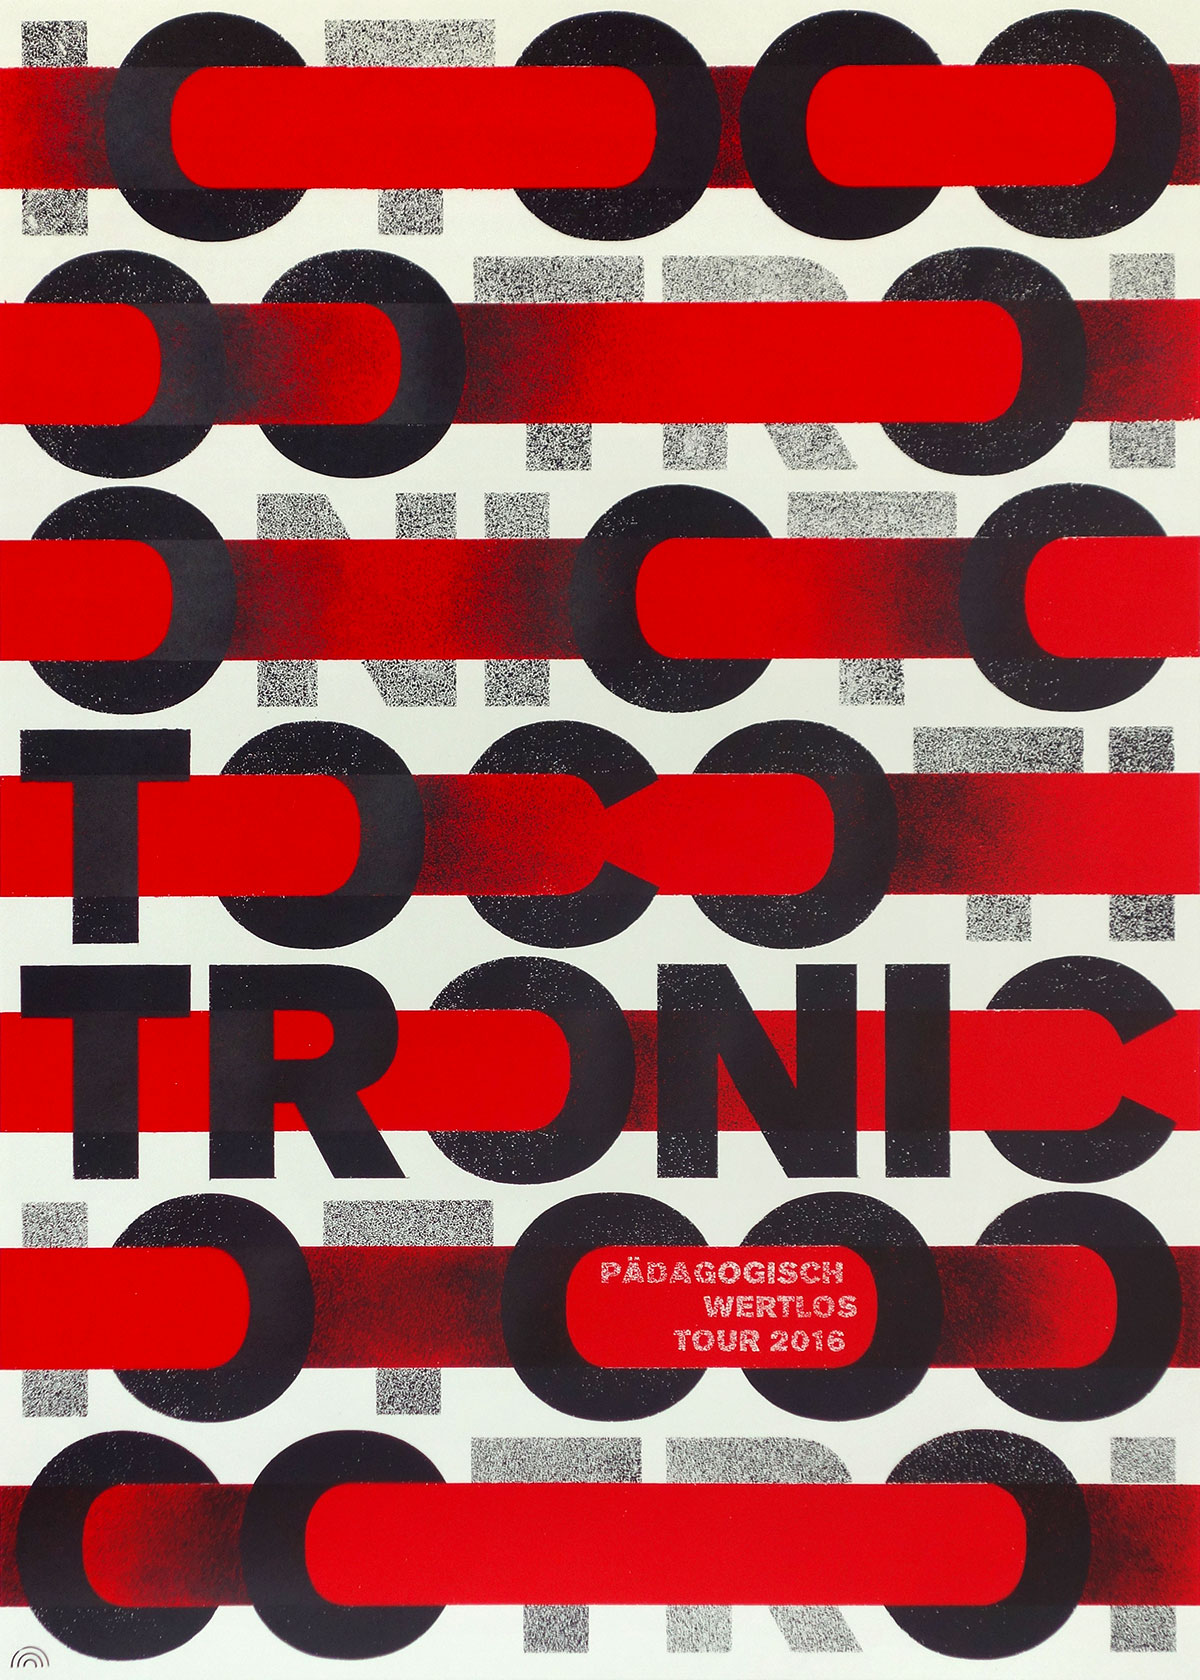 Tocotronic gigposter by Rainbow Posters